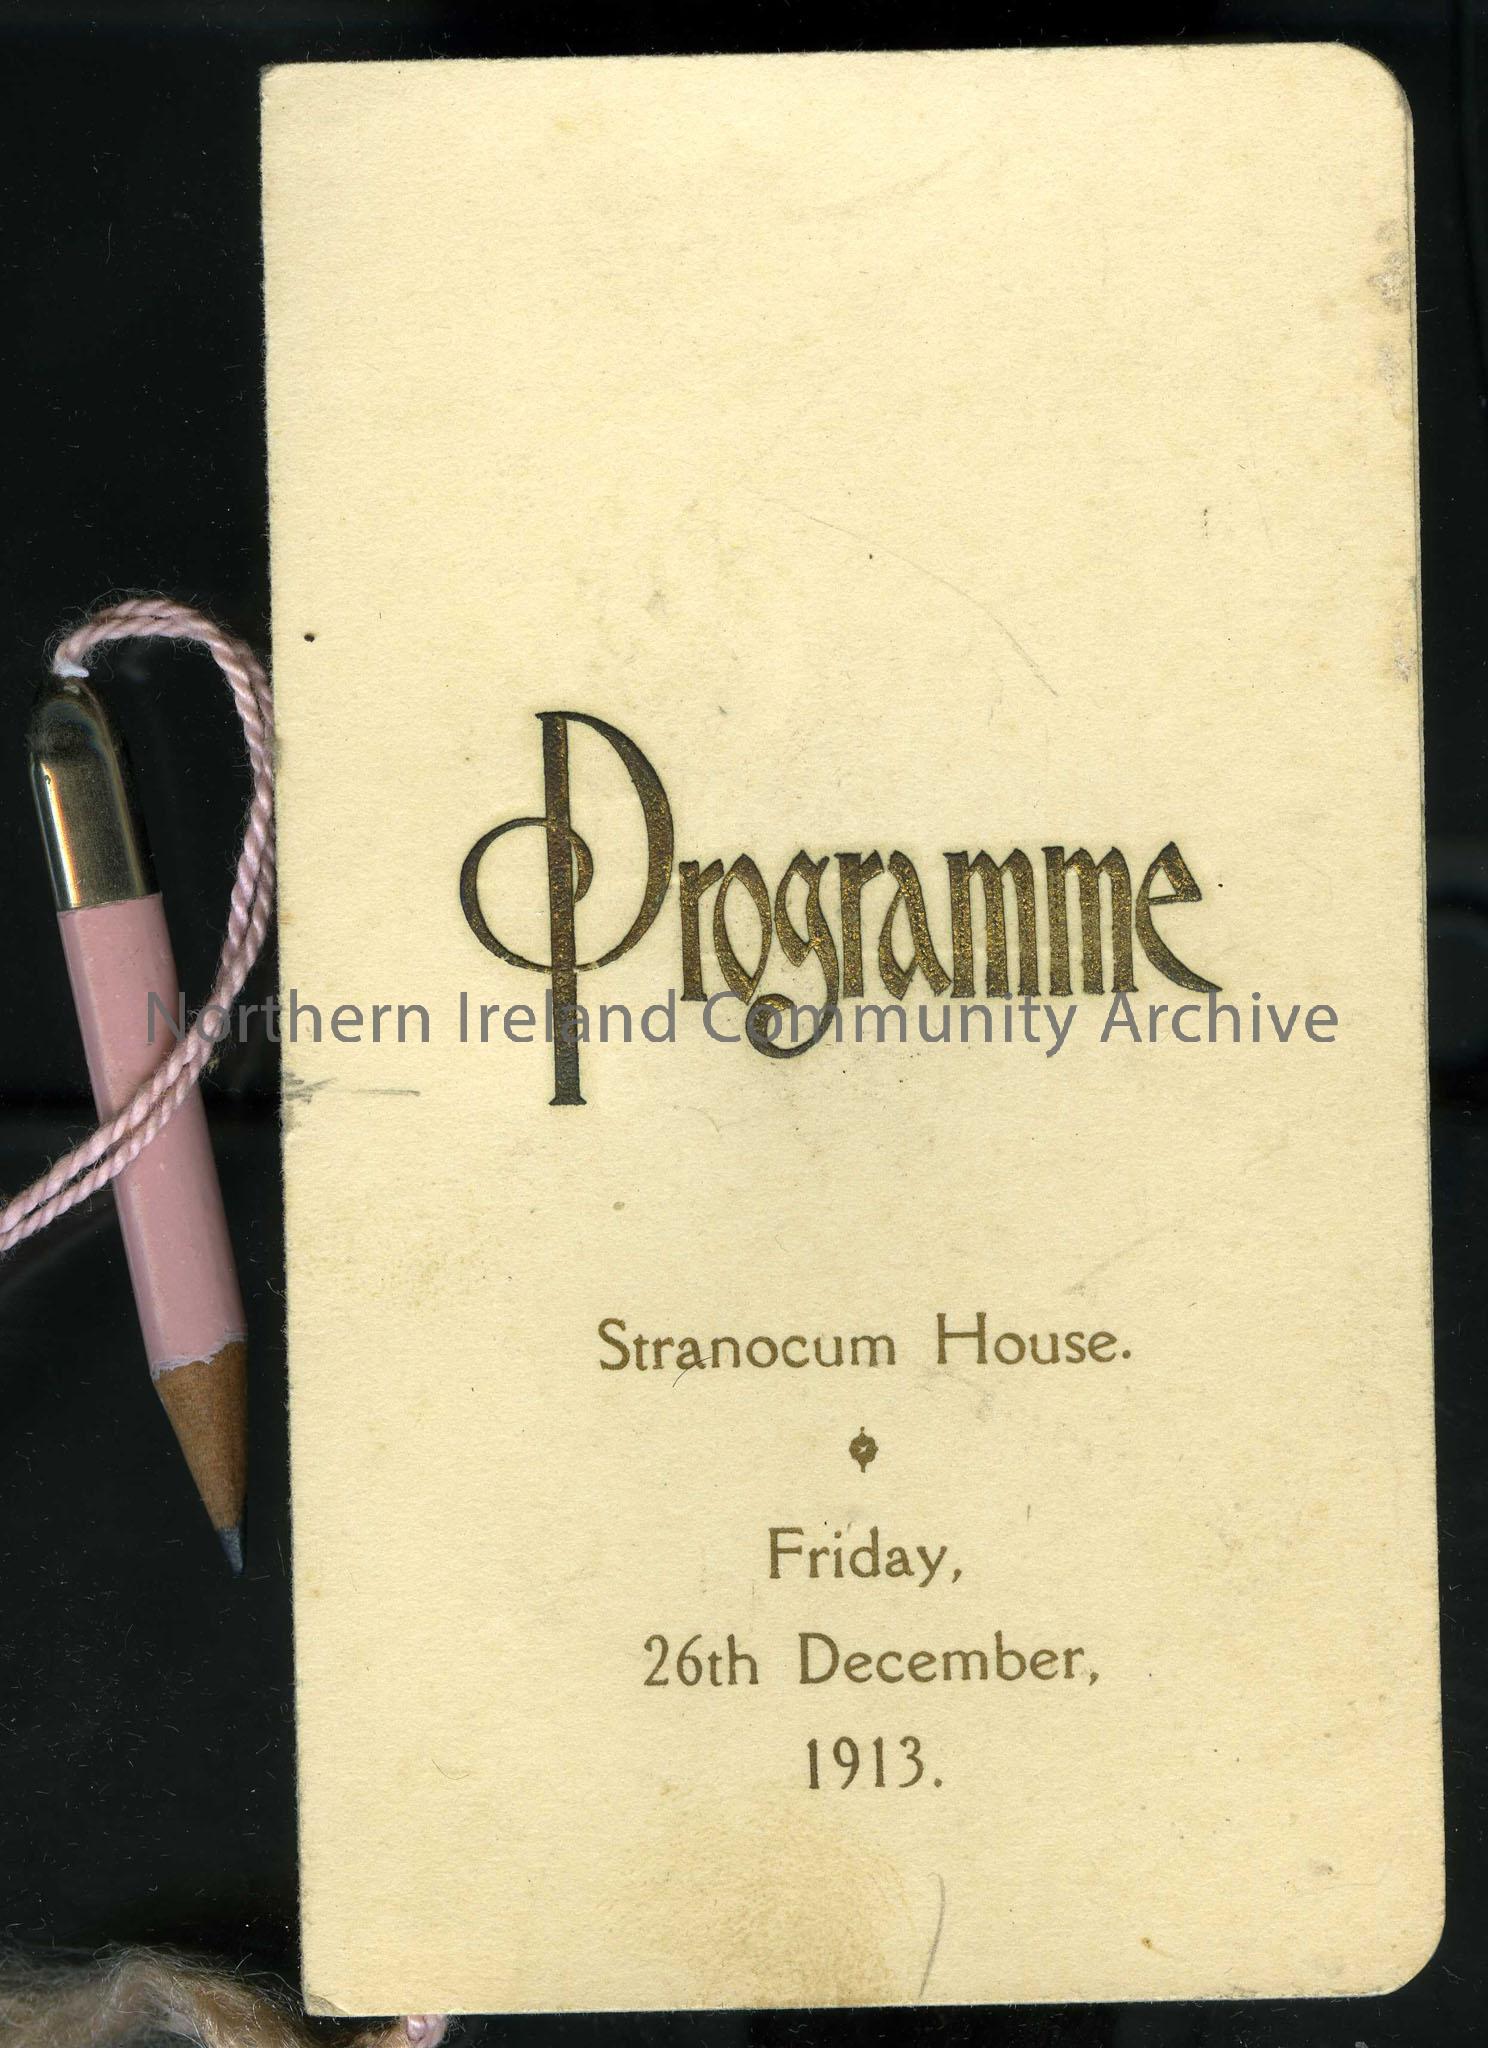 Dance card or programme.  Stranocum House, Friday, 26th December, 1913.  Names inside and pencil attached.